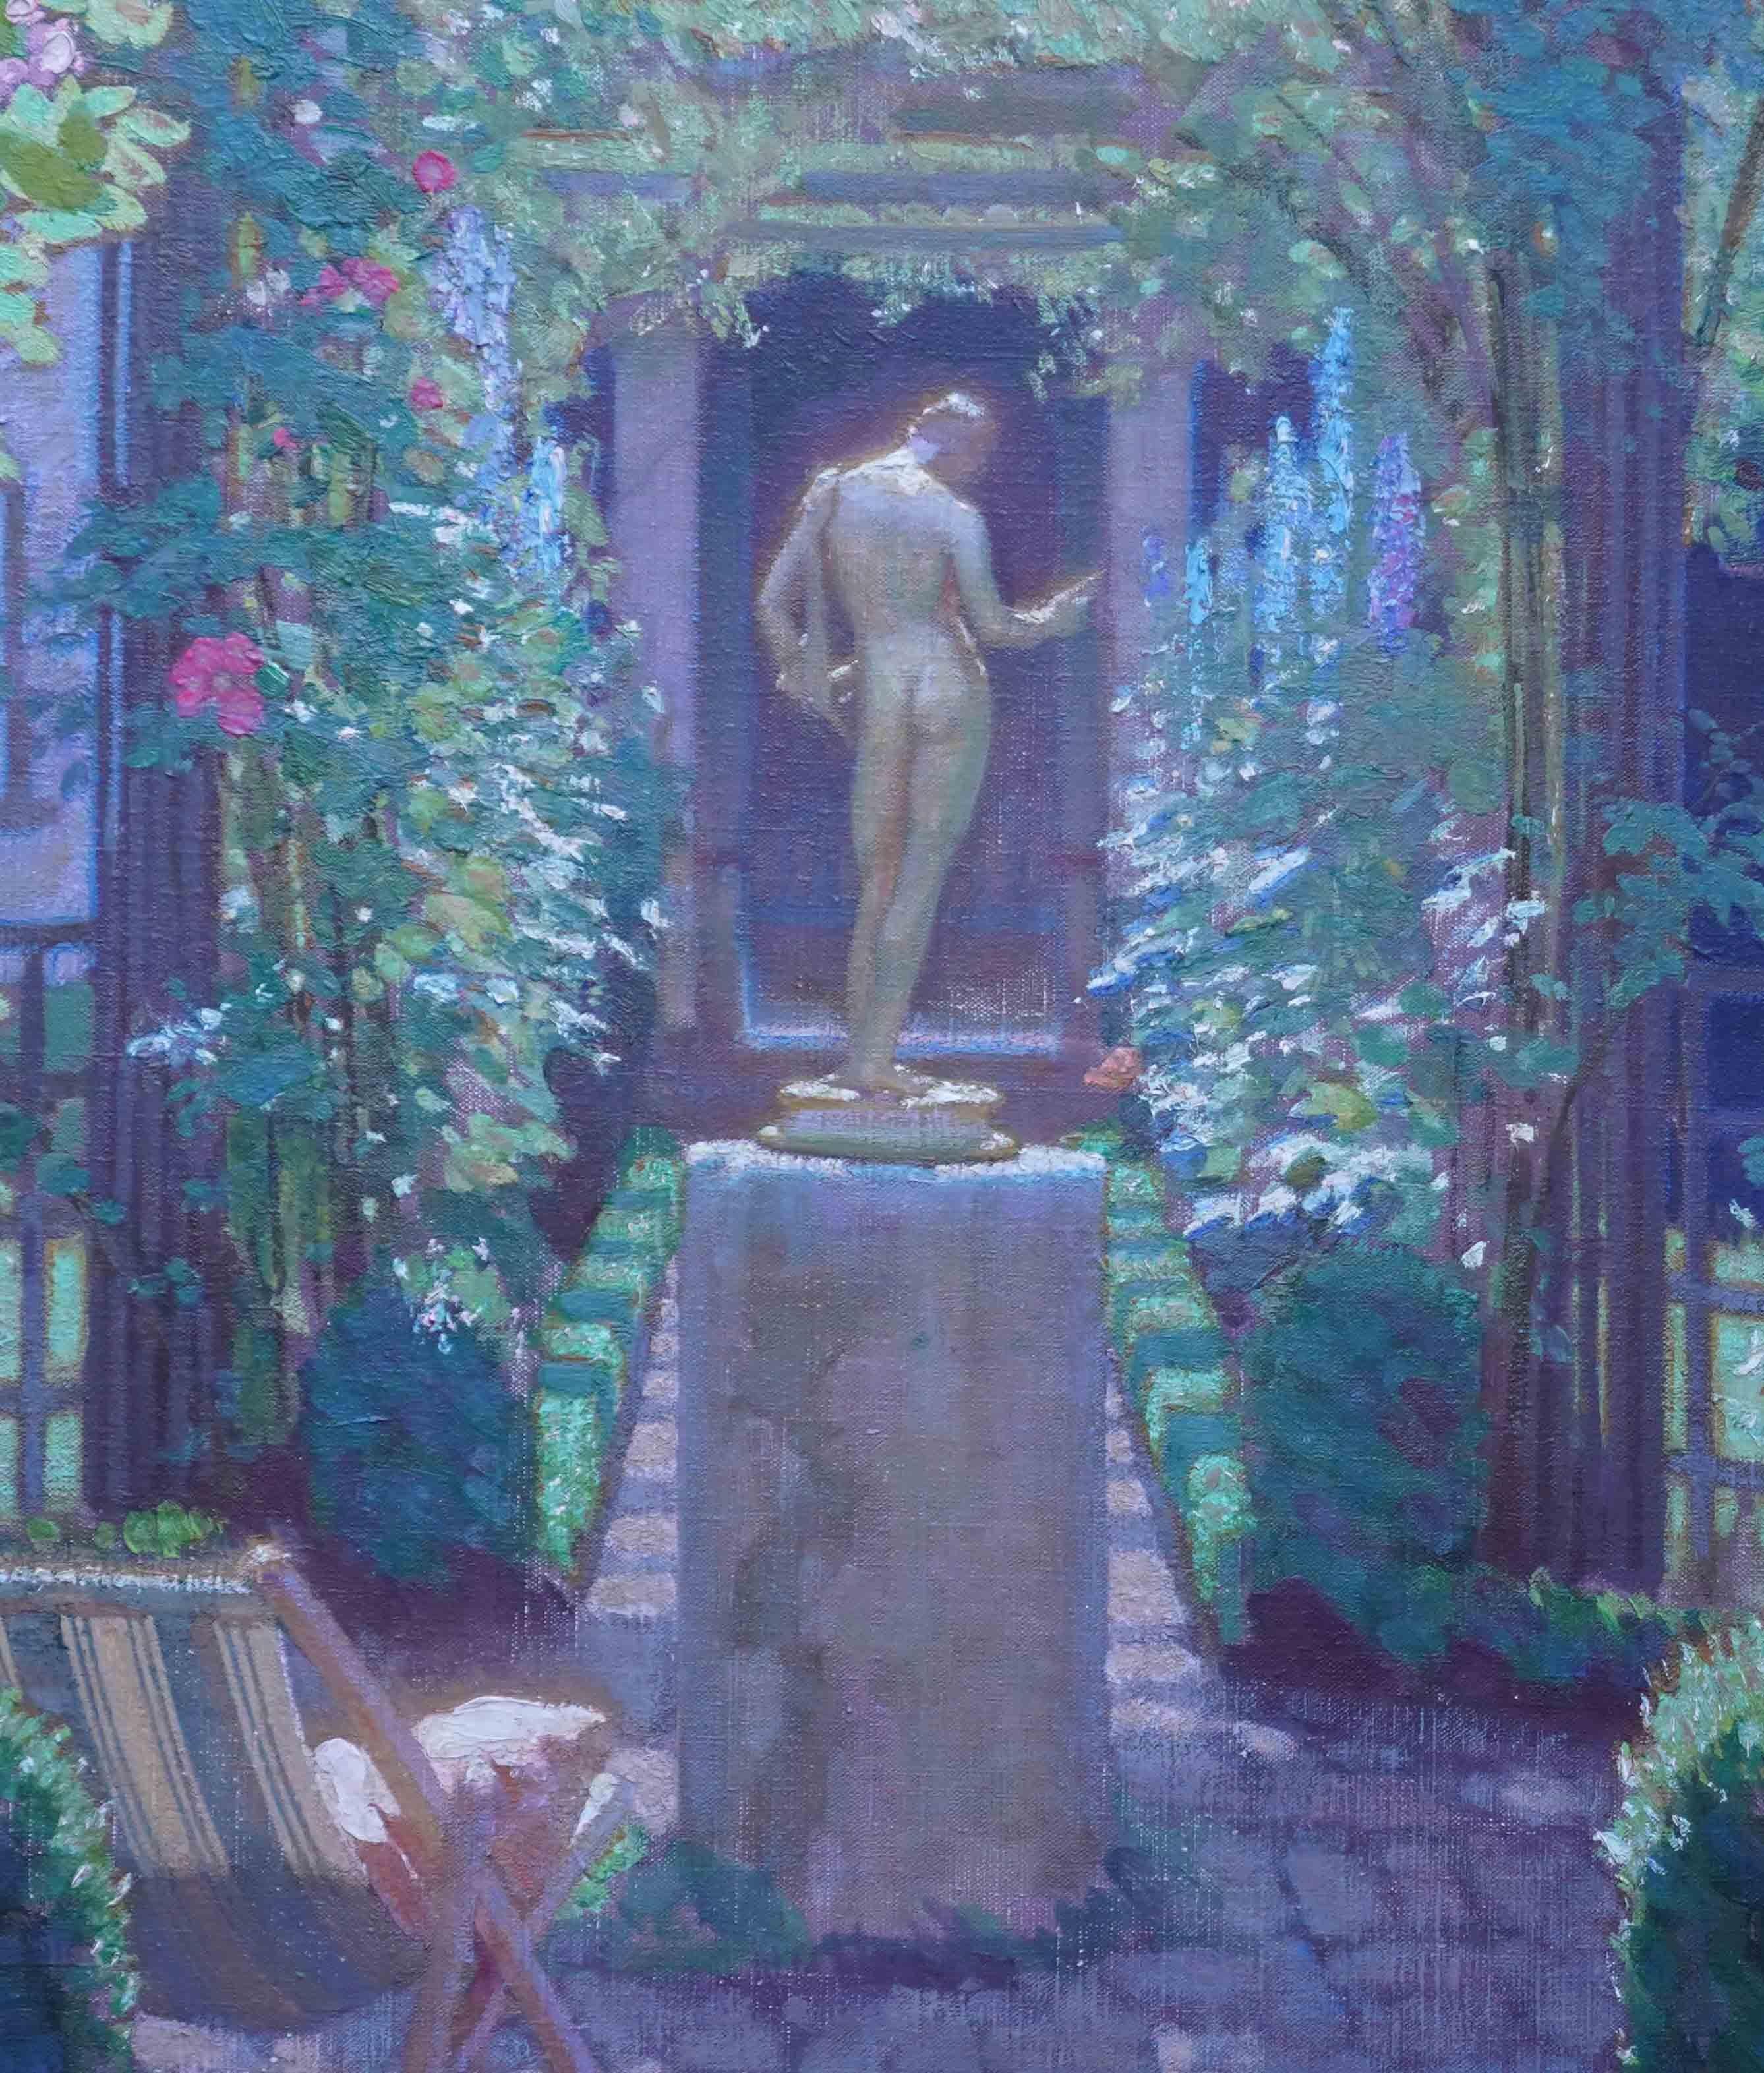 Garden with Classical Statue - British 1930's art gardenscape oil painting - Impressionist Painting by Harold Speed